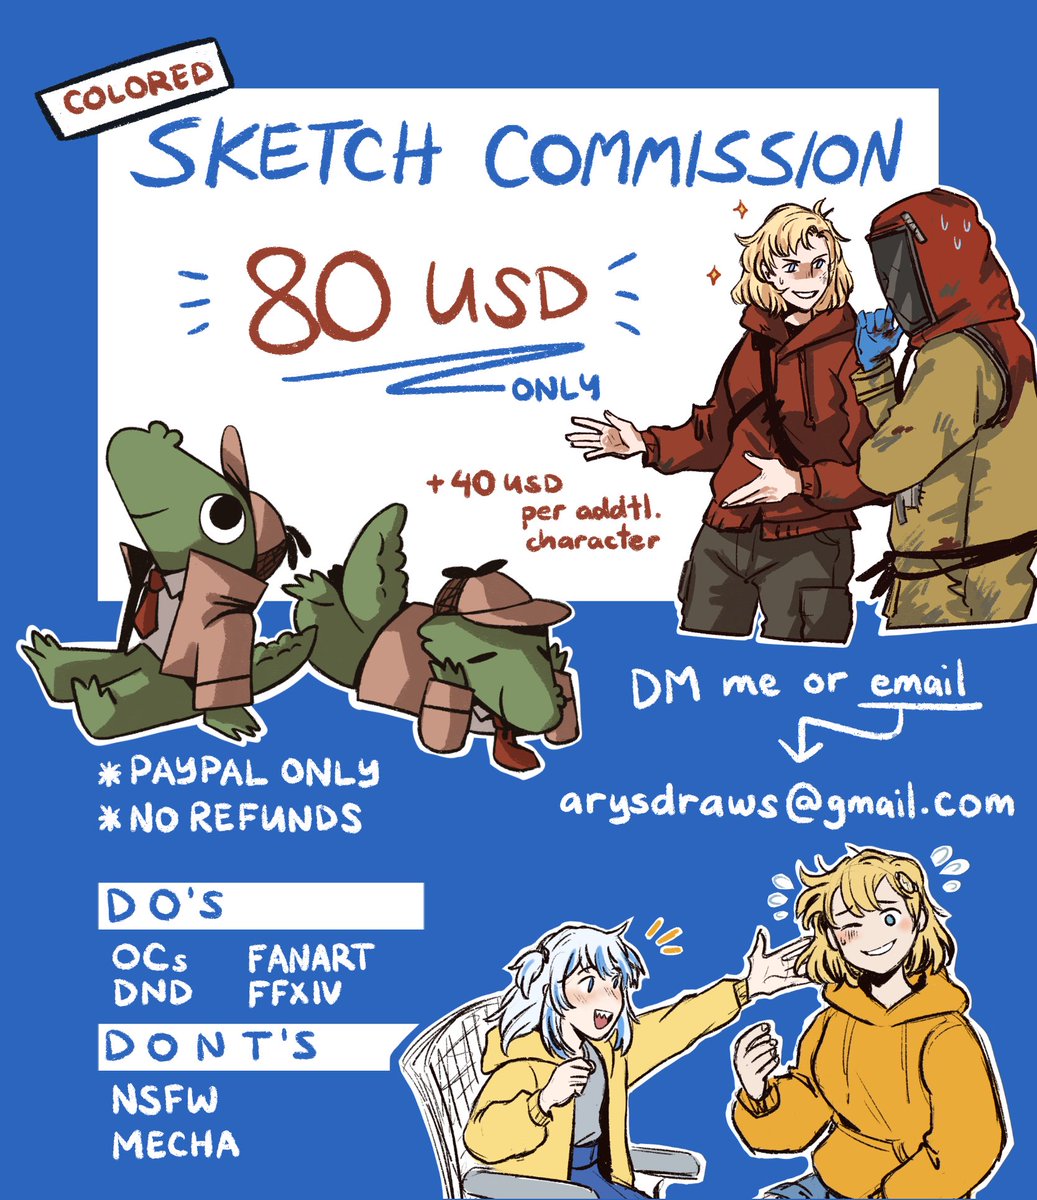 in need of emergency funds right now, so i'm opening full body colored sketch commissions 🧍

rts appreciated 🙇 